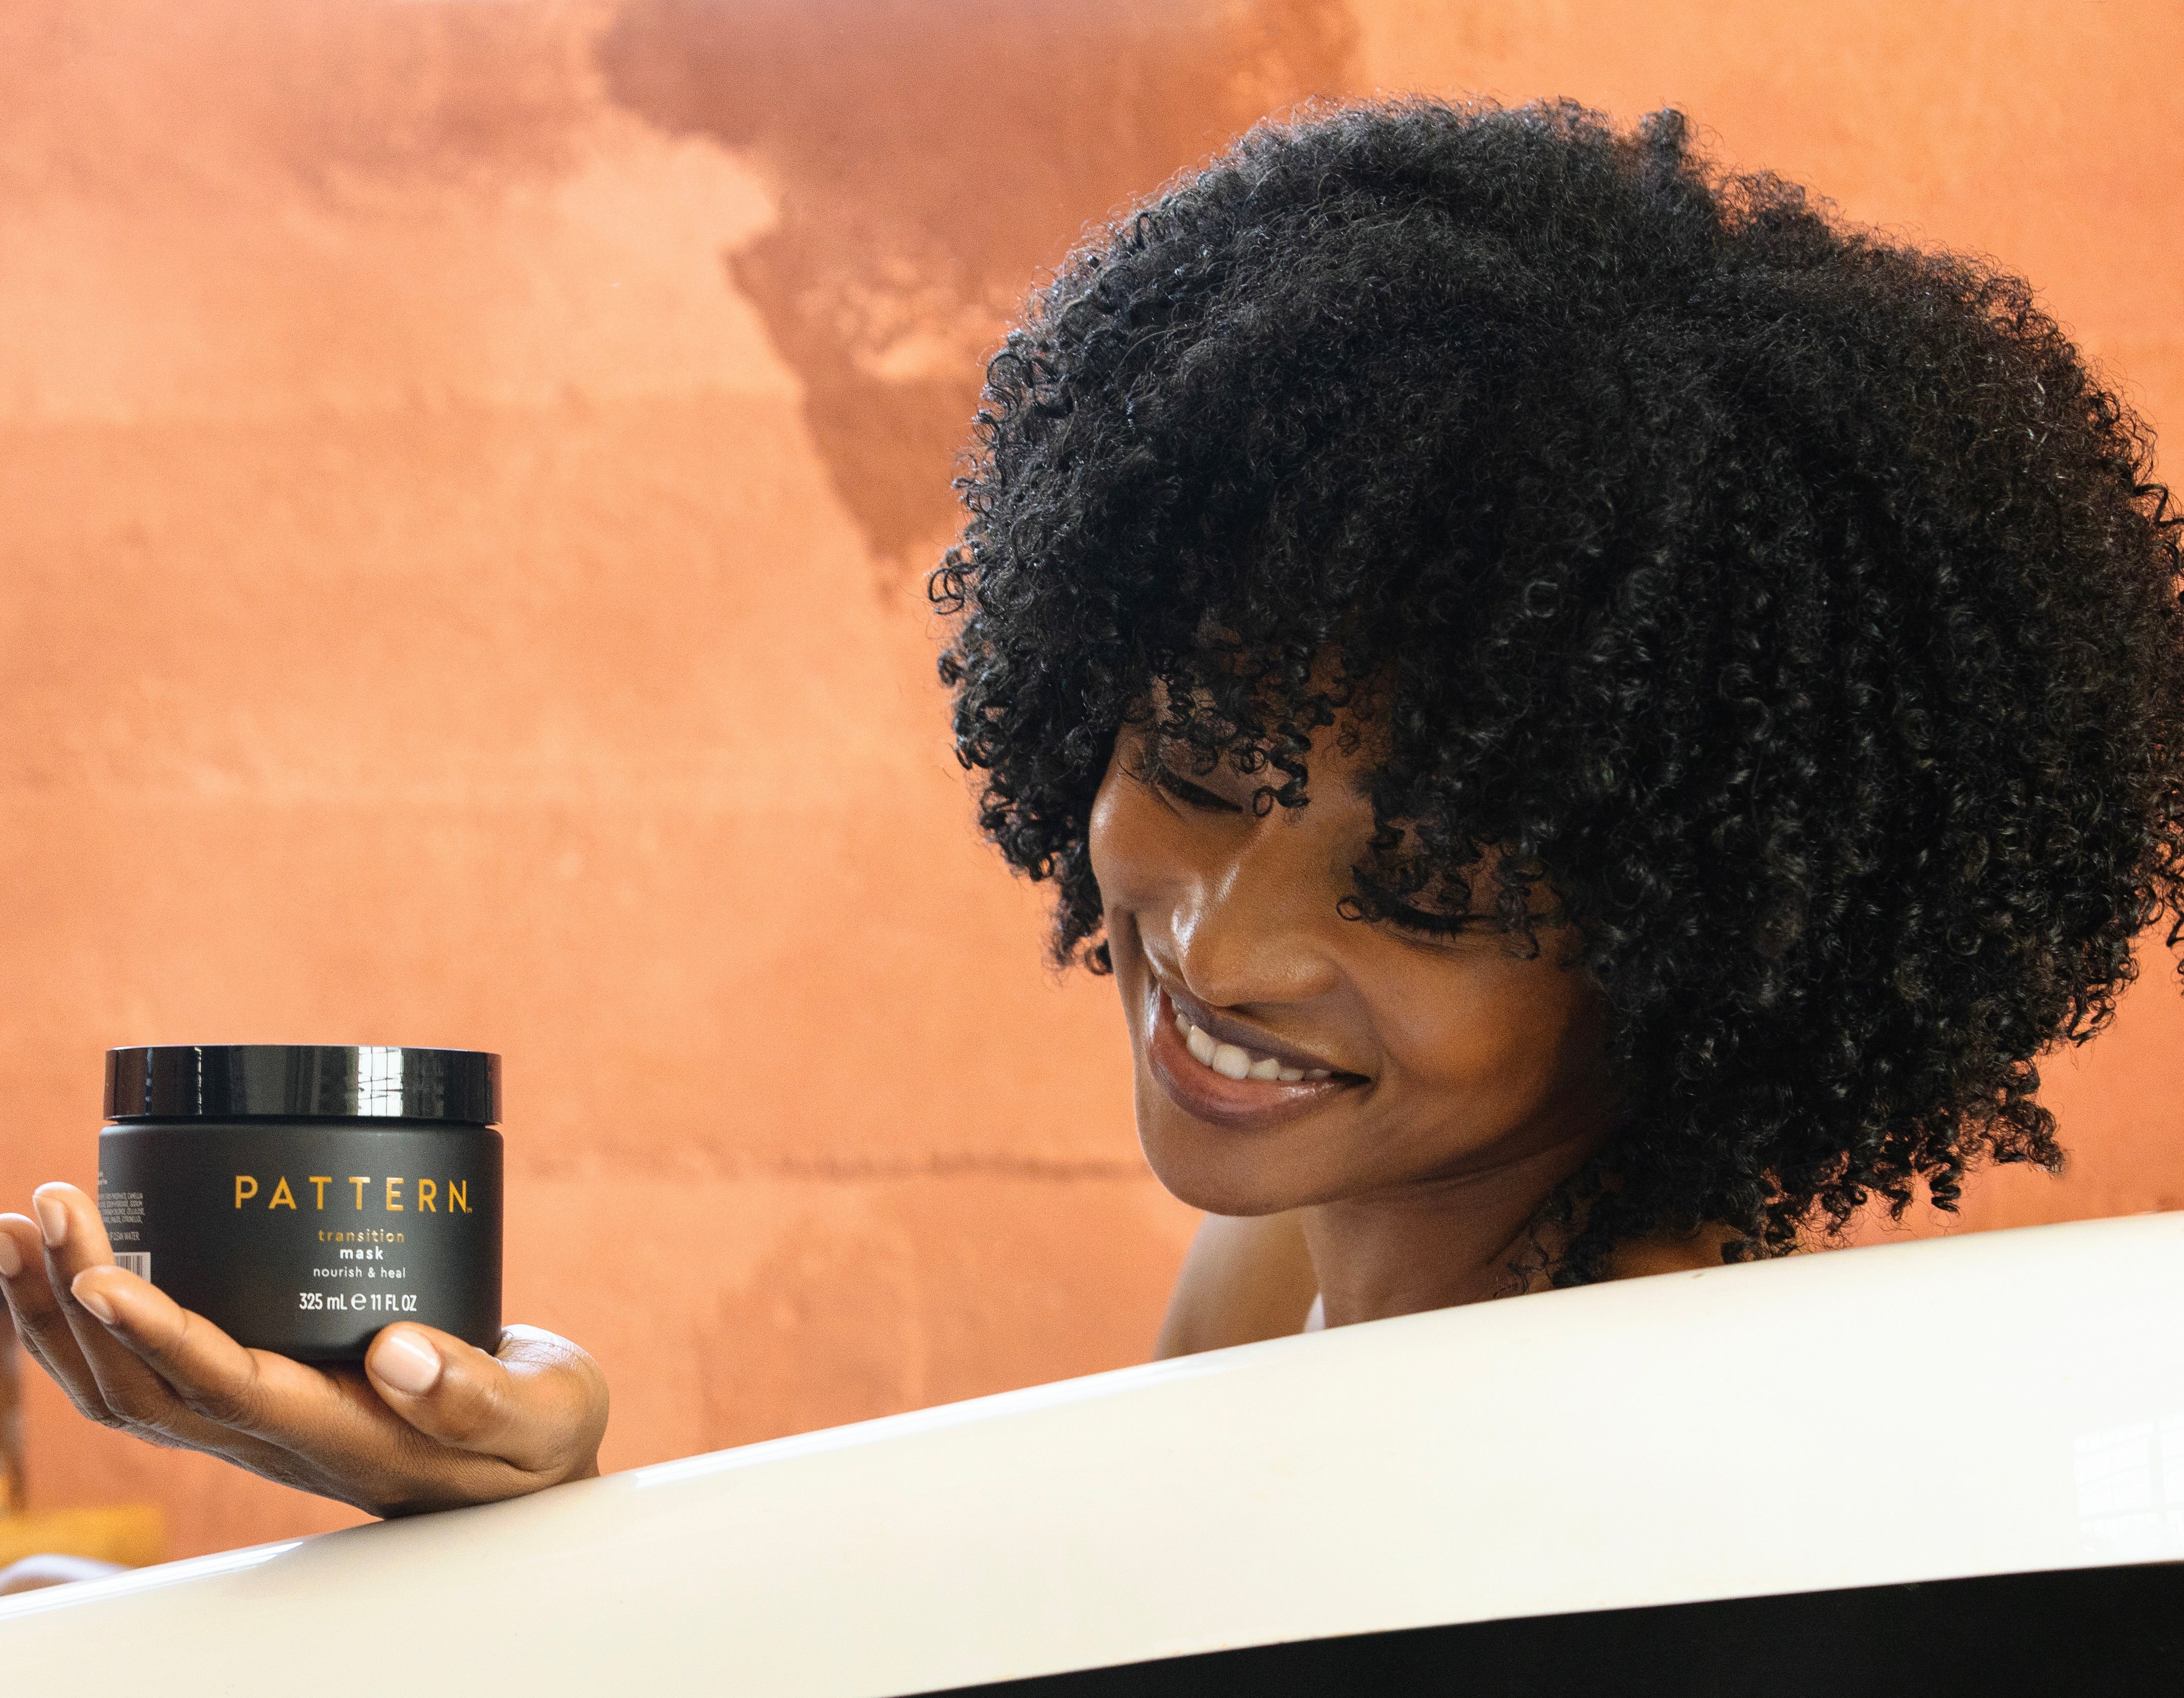 Best For Curls And Coils Haircare Discovery Kit - LUSH